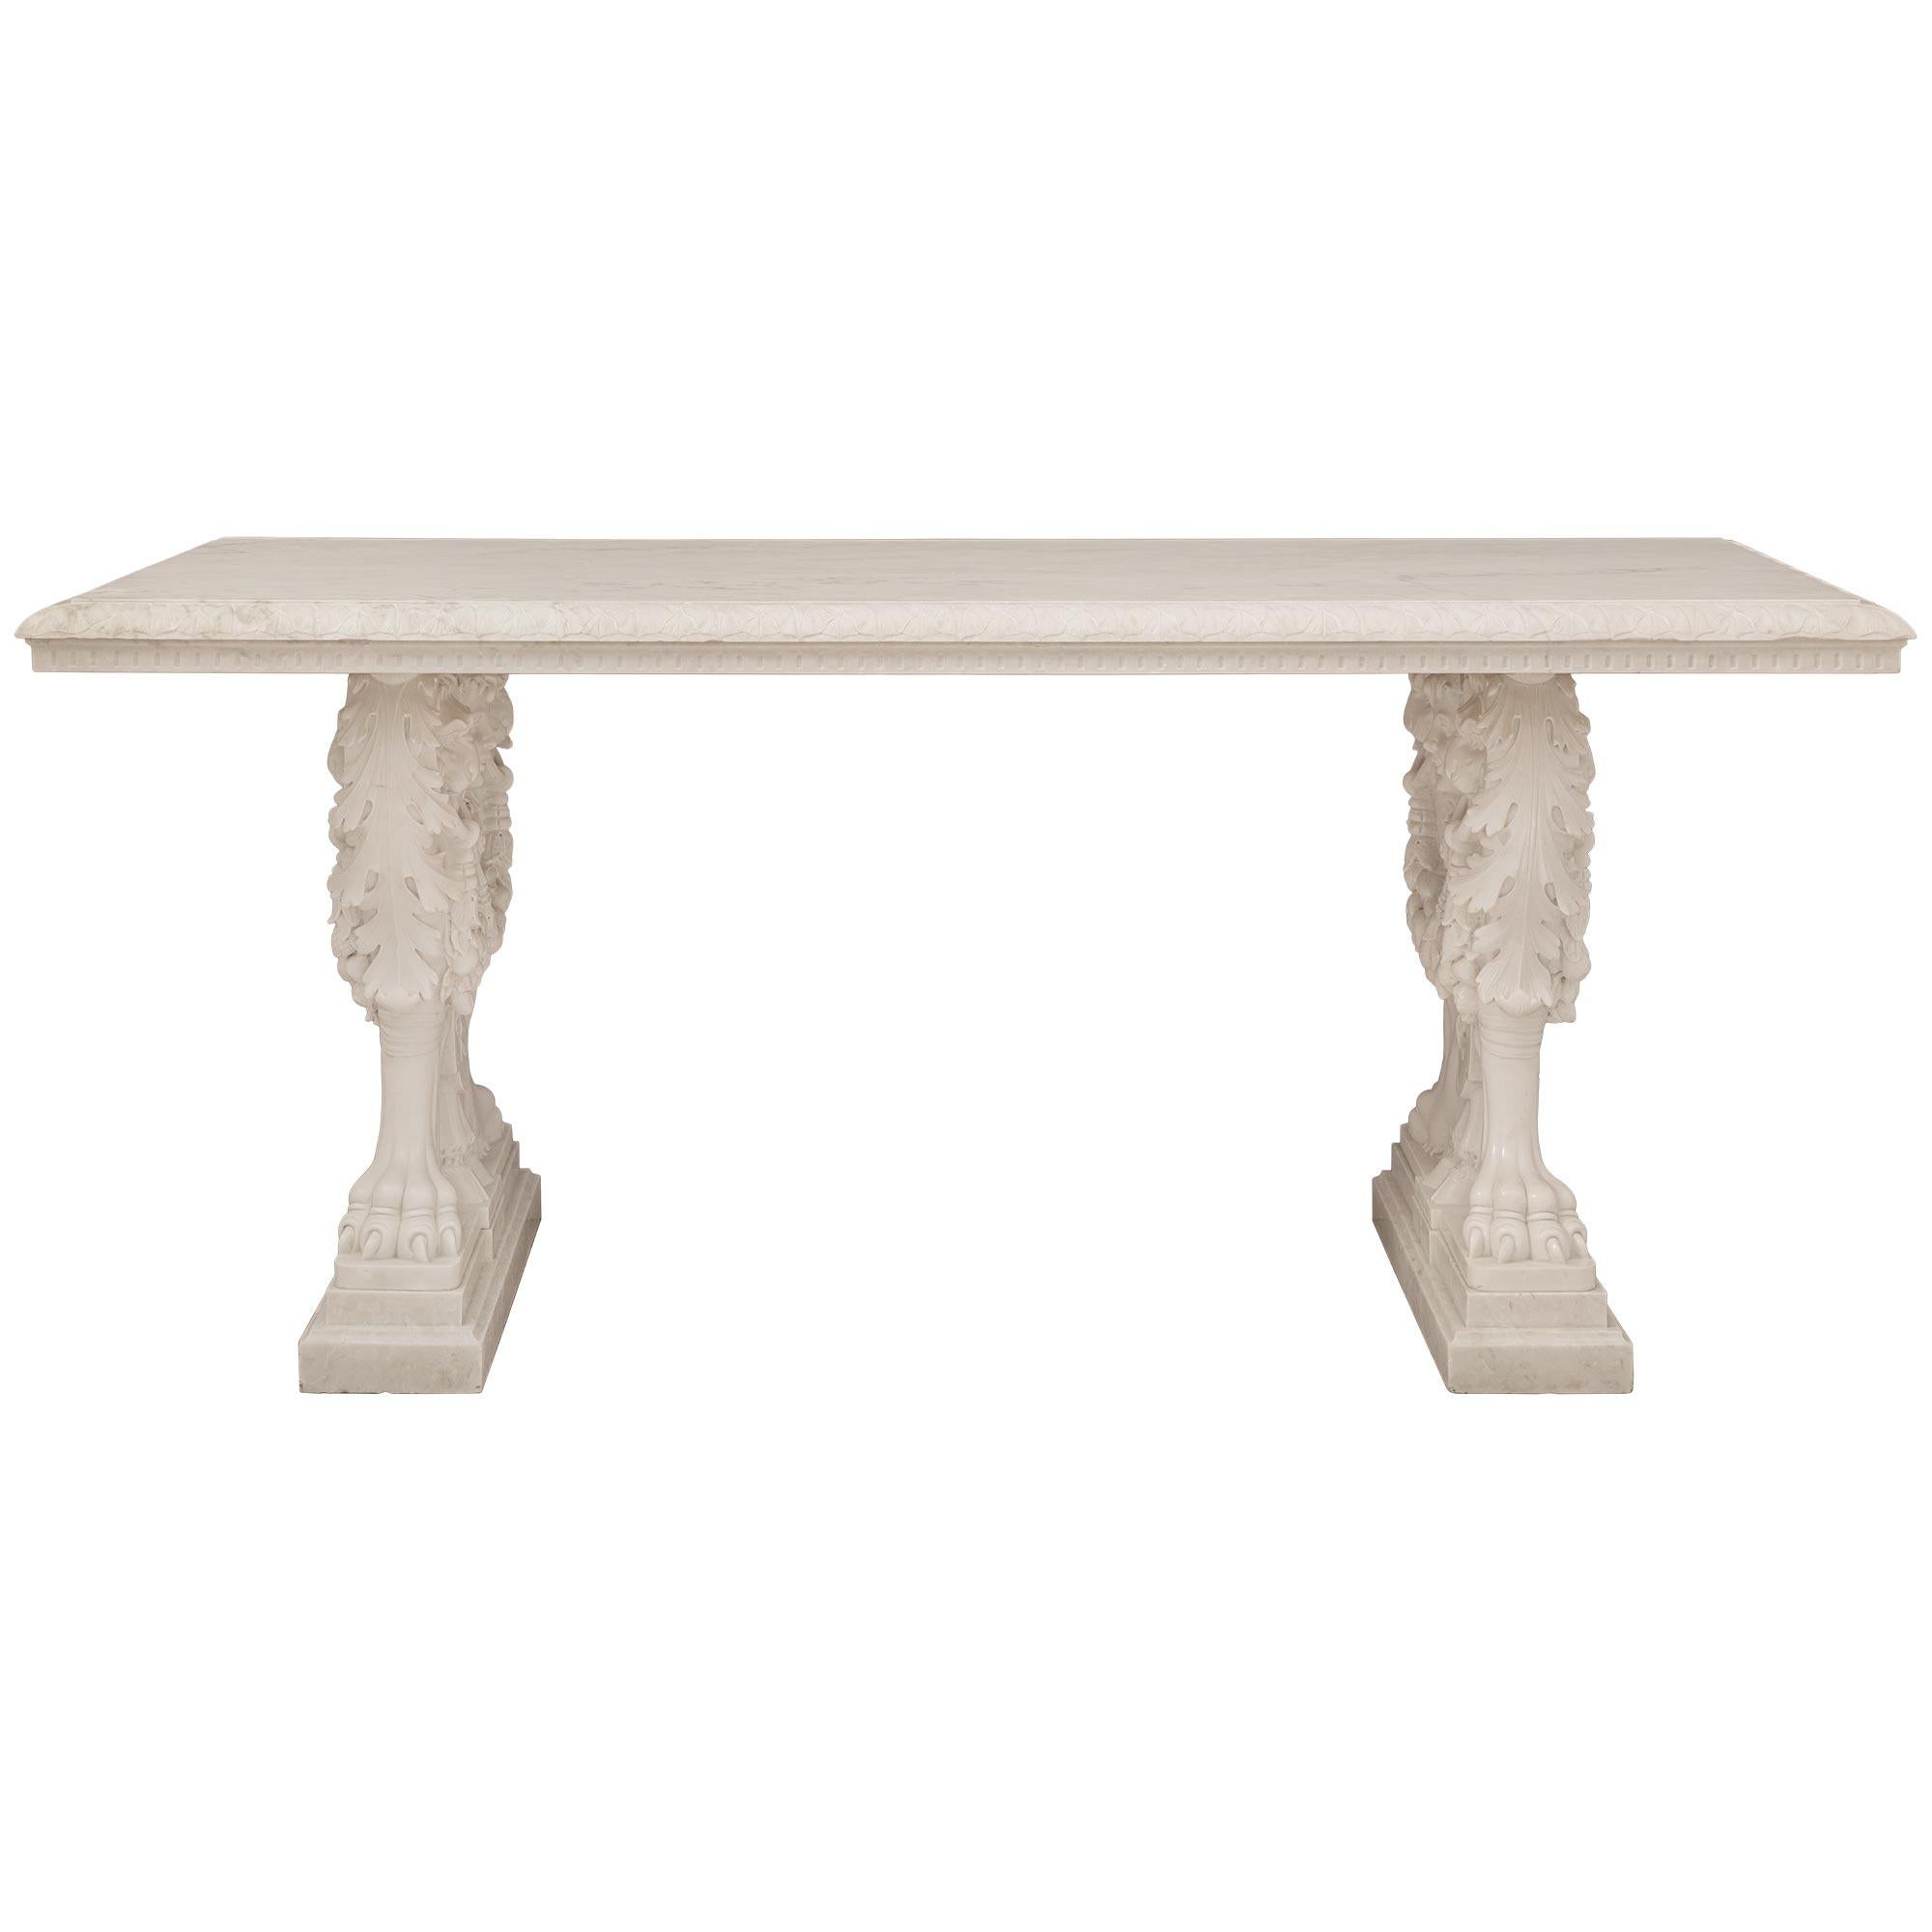 Italian 19th Century Neo-Classical St. White Carrara Marble Center Table For Sale 5